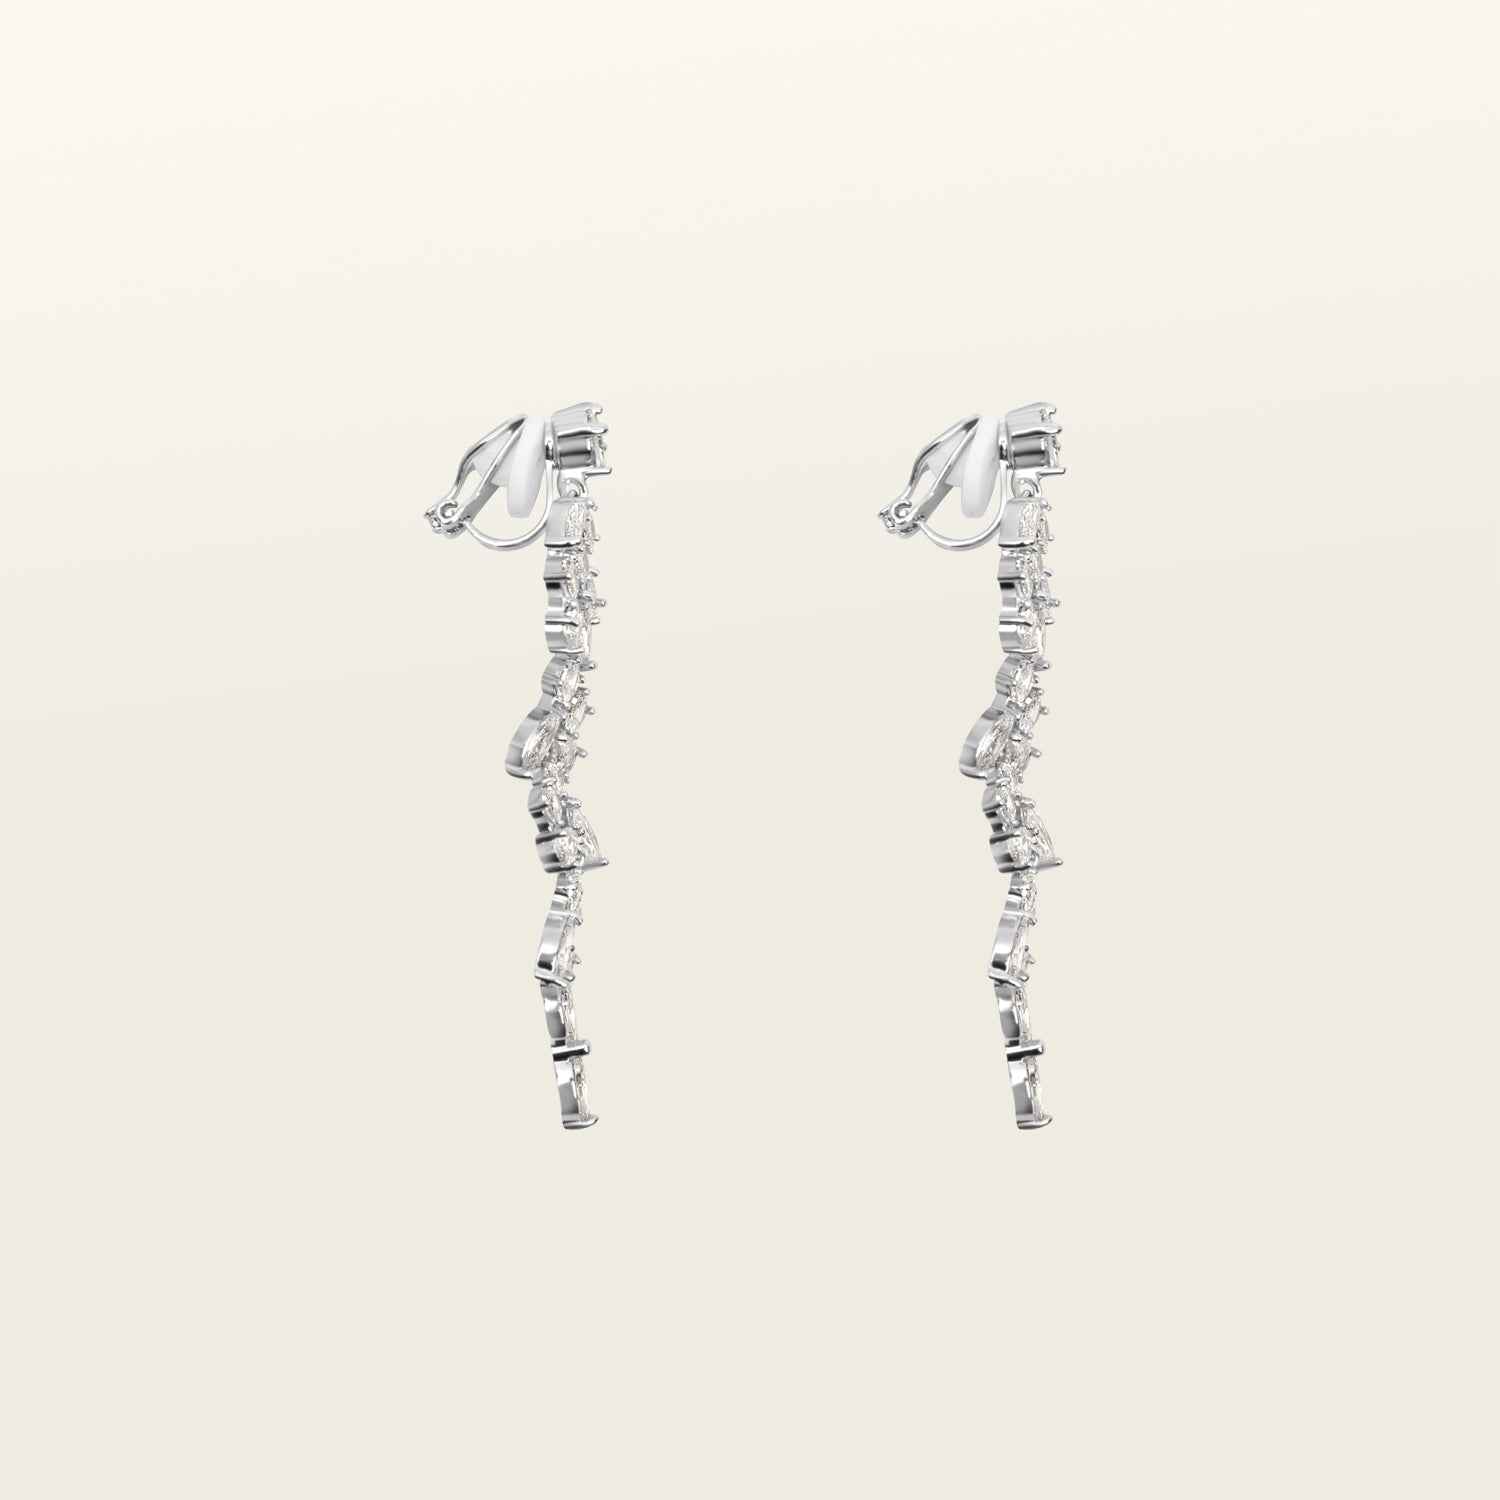 Image of the Cascade Chandelier Clip On Earrings, effortless elegance is yours with these Clip-On Hoop Earrings. Crafted from a luxurious combination of Silver tone copper alloy and Cubic Zirconia, these stylish earrings provide secure closure with their removable rubber padding. Lead/Nickel/Cadmium free, these glamorous earrings are the perfect addition to any ensemble.